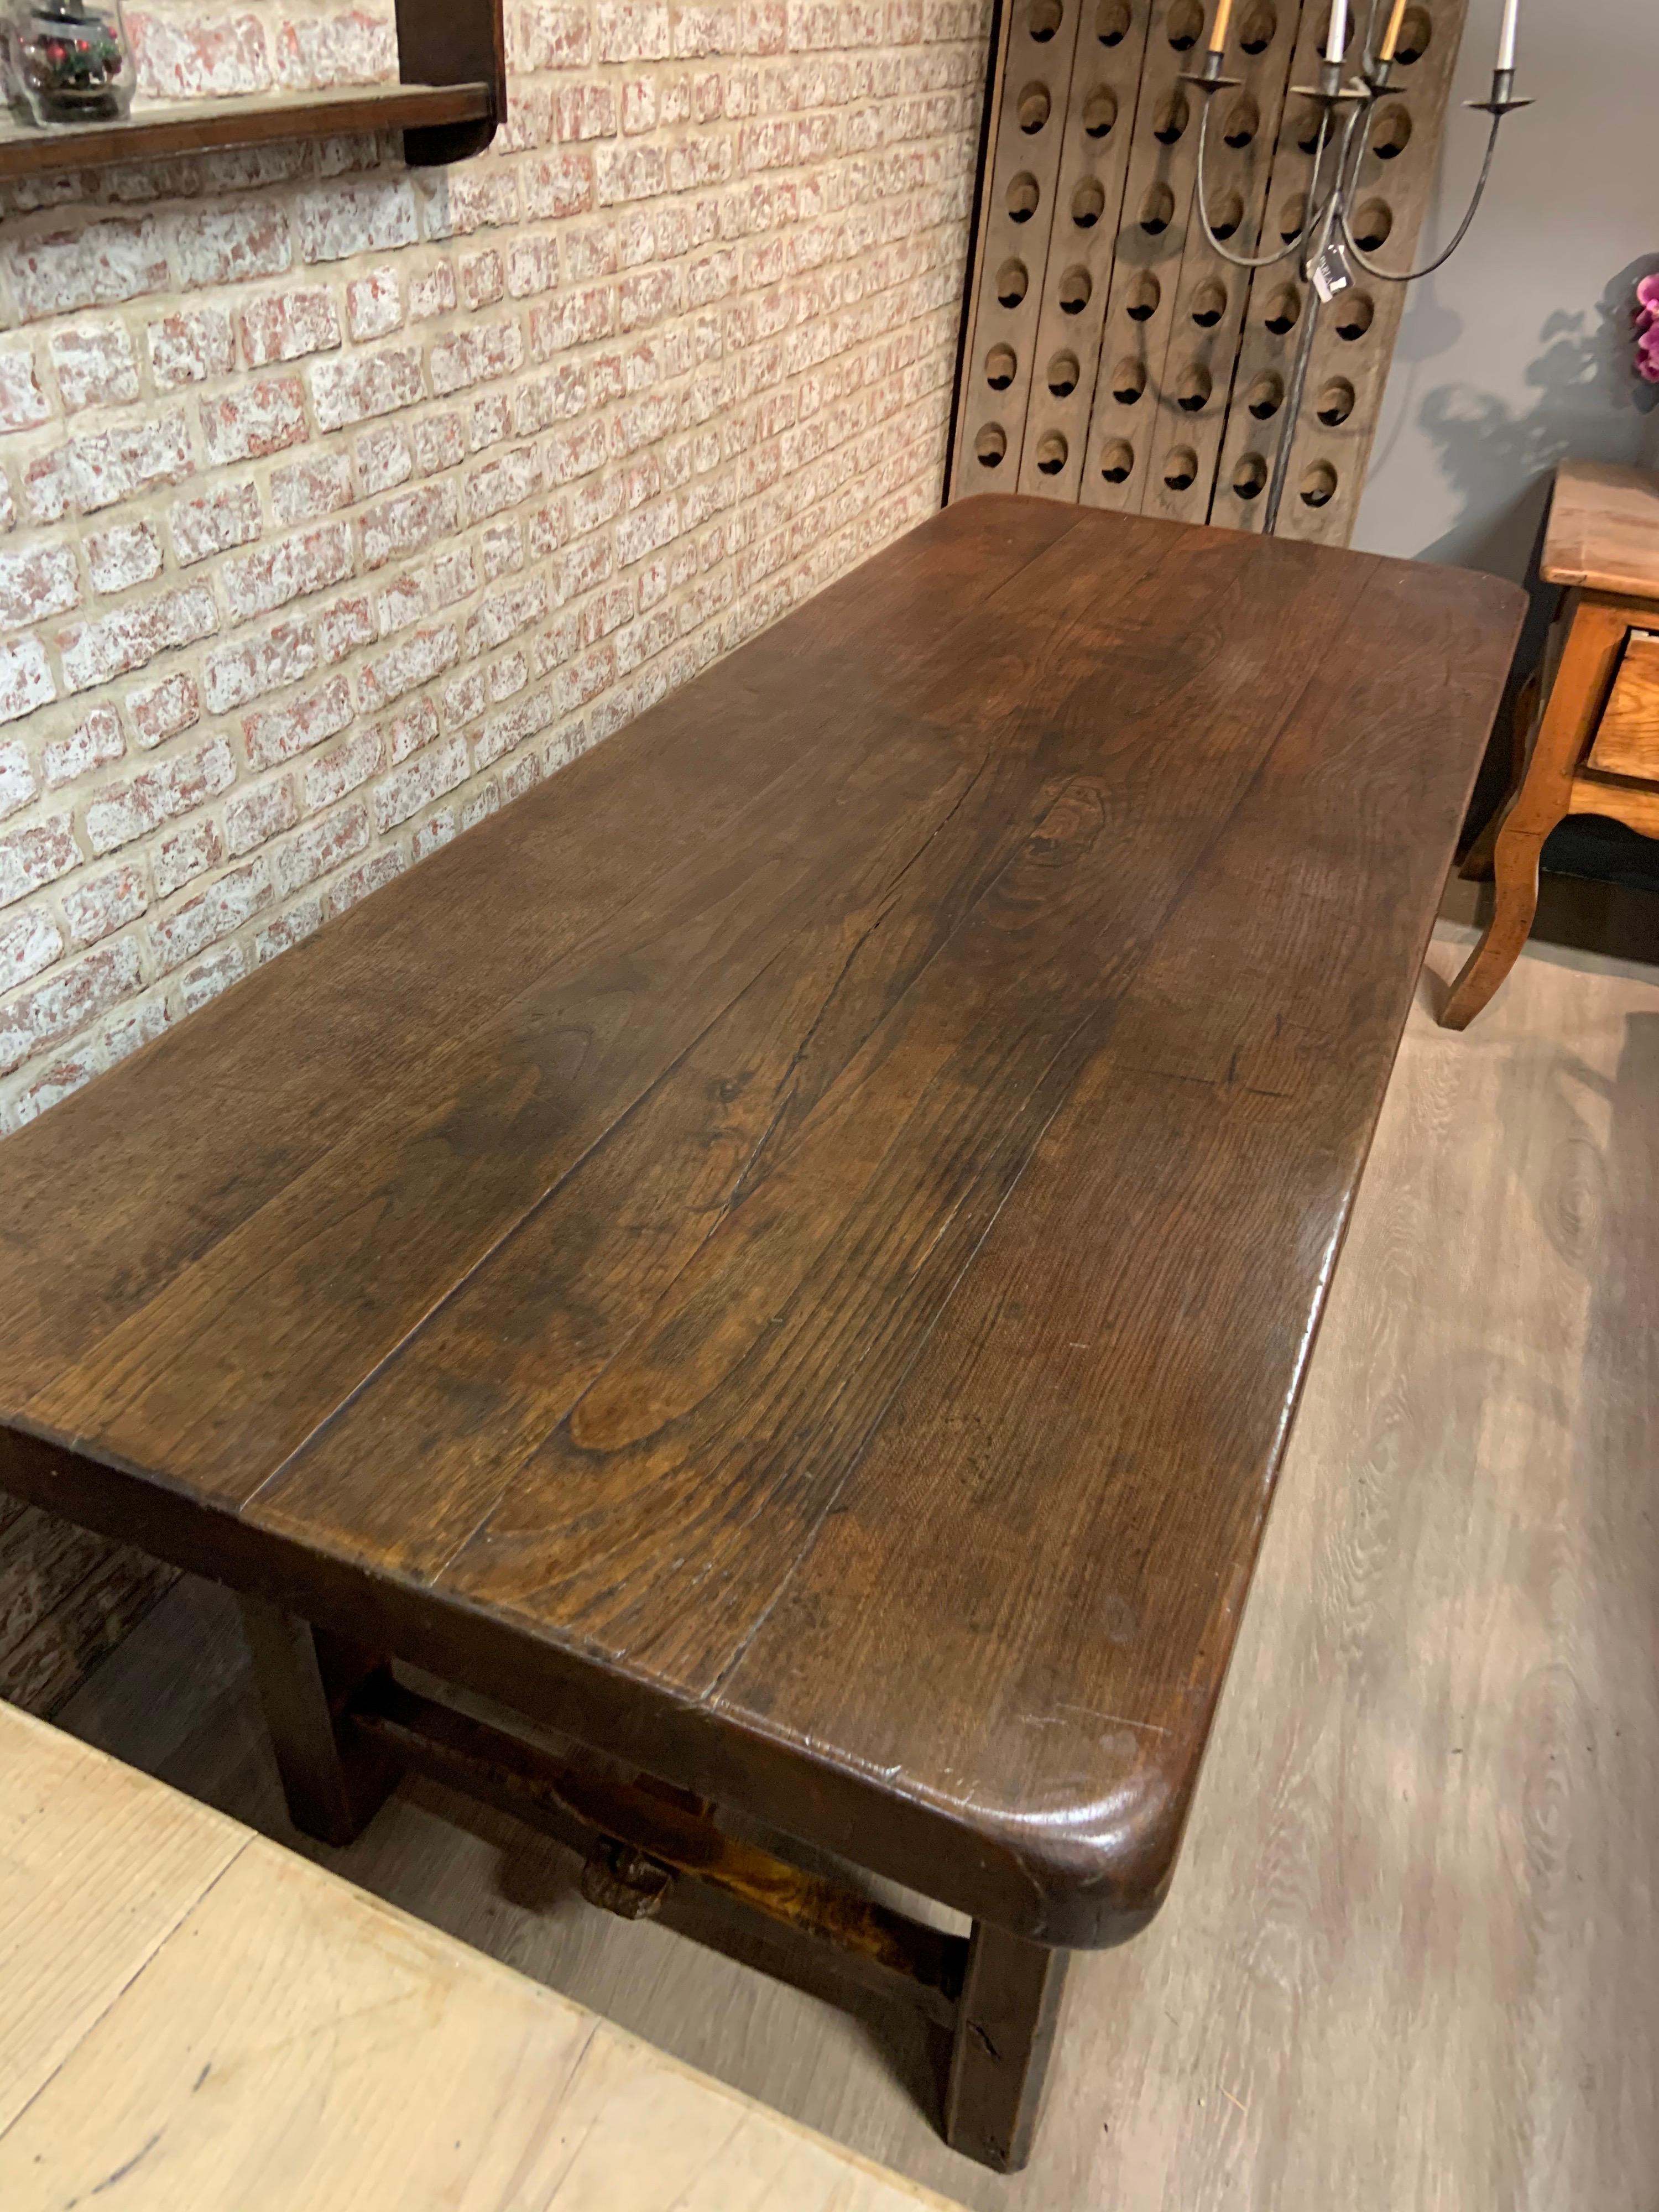 Late 19th century oak farmhouse table with centre stretcher and side end stretchers. 3” thick rounded top fabulous color and patination. Plenty of leg room and a very comfortable table to be seated at.